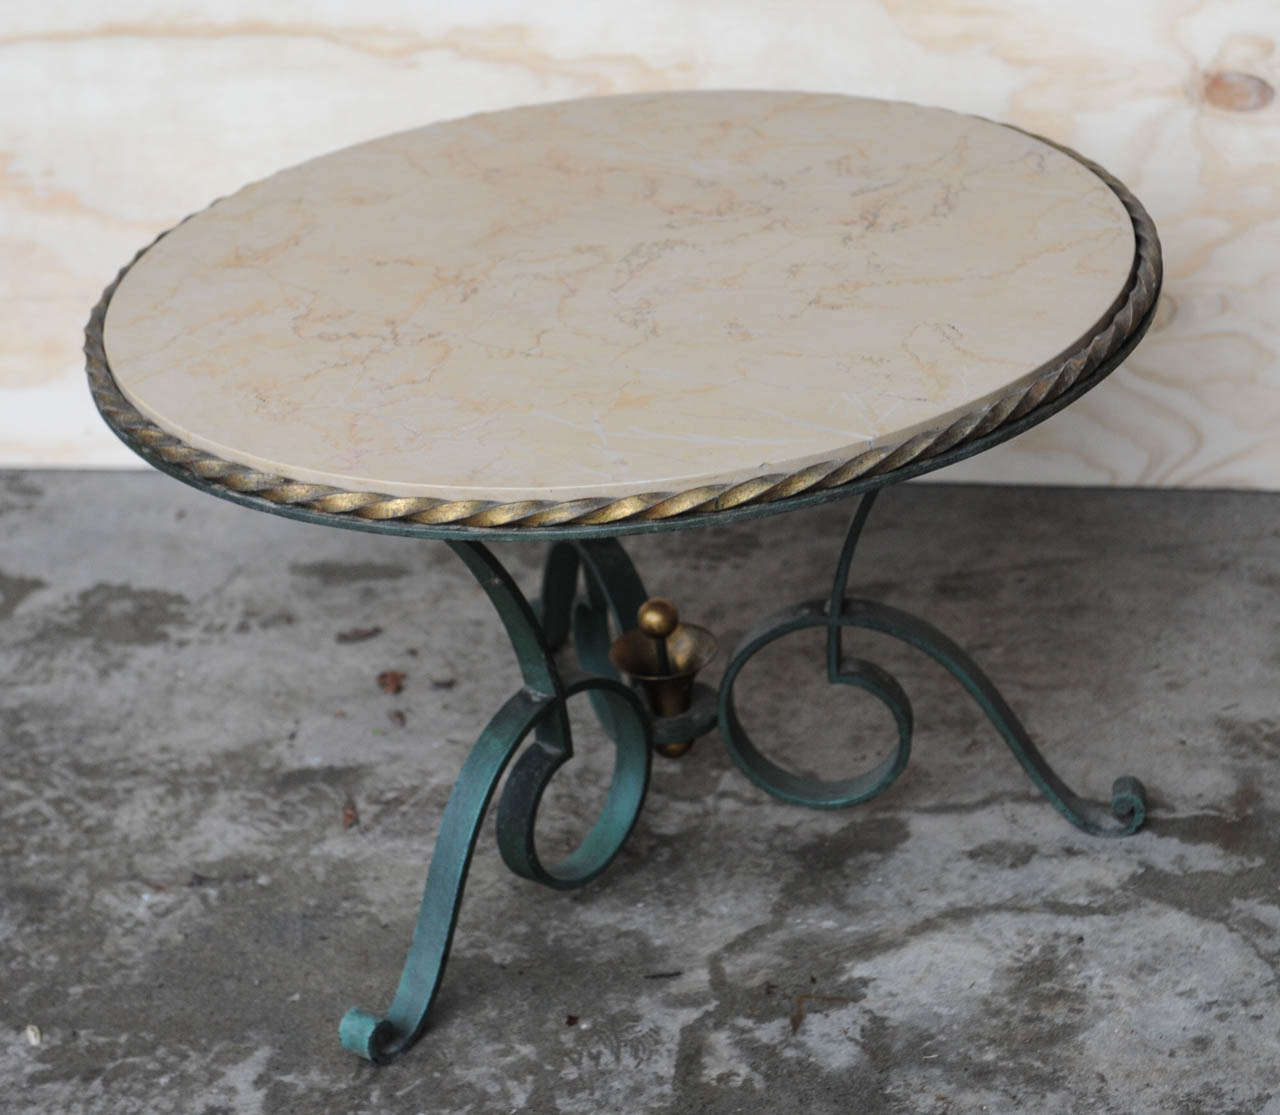 Round wrought iron coffee table with ivory coloured marble top.
French design, 1940's by Robert Merceris.